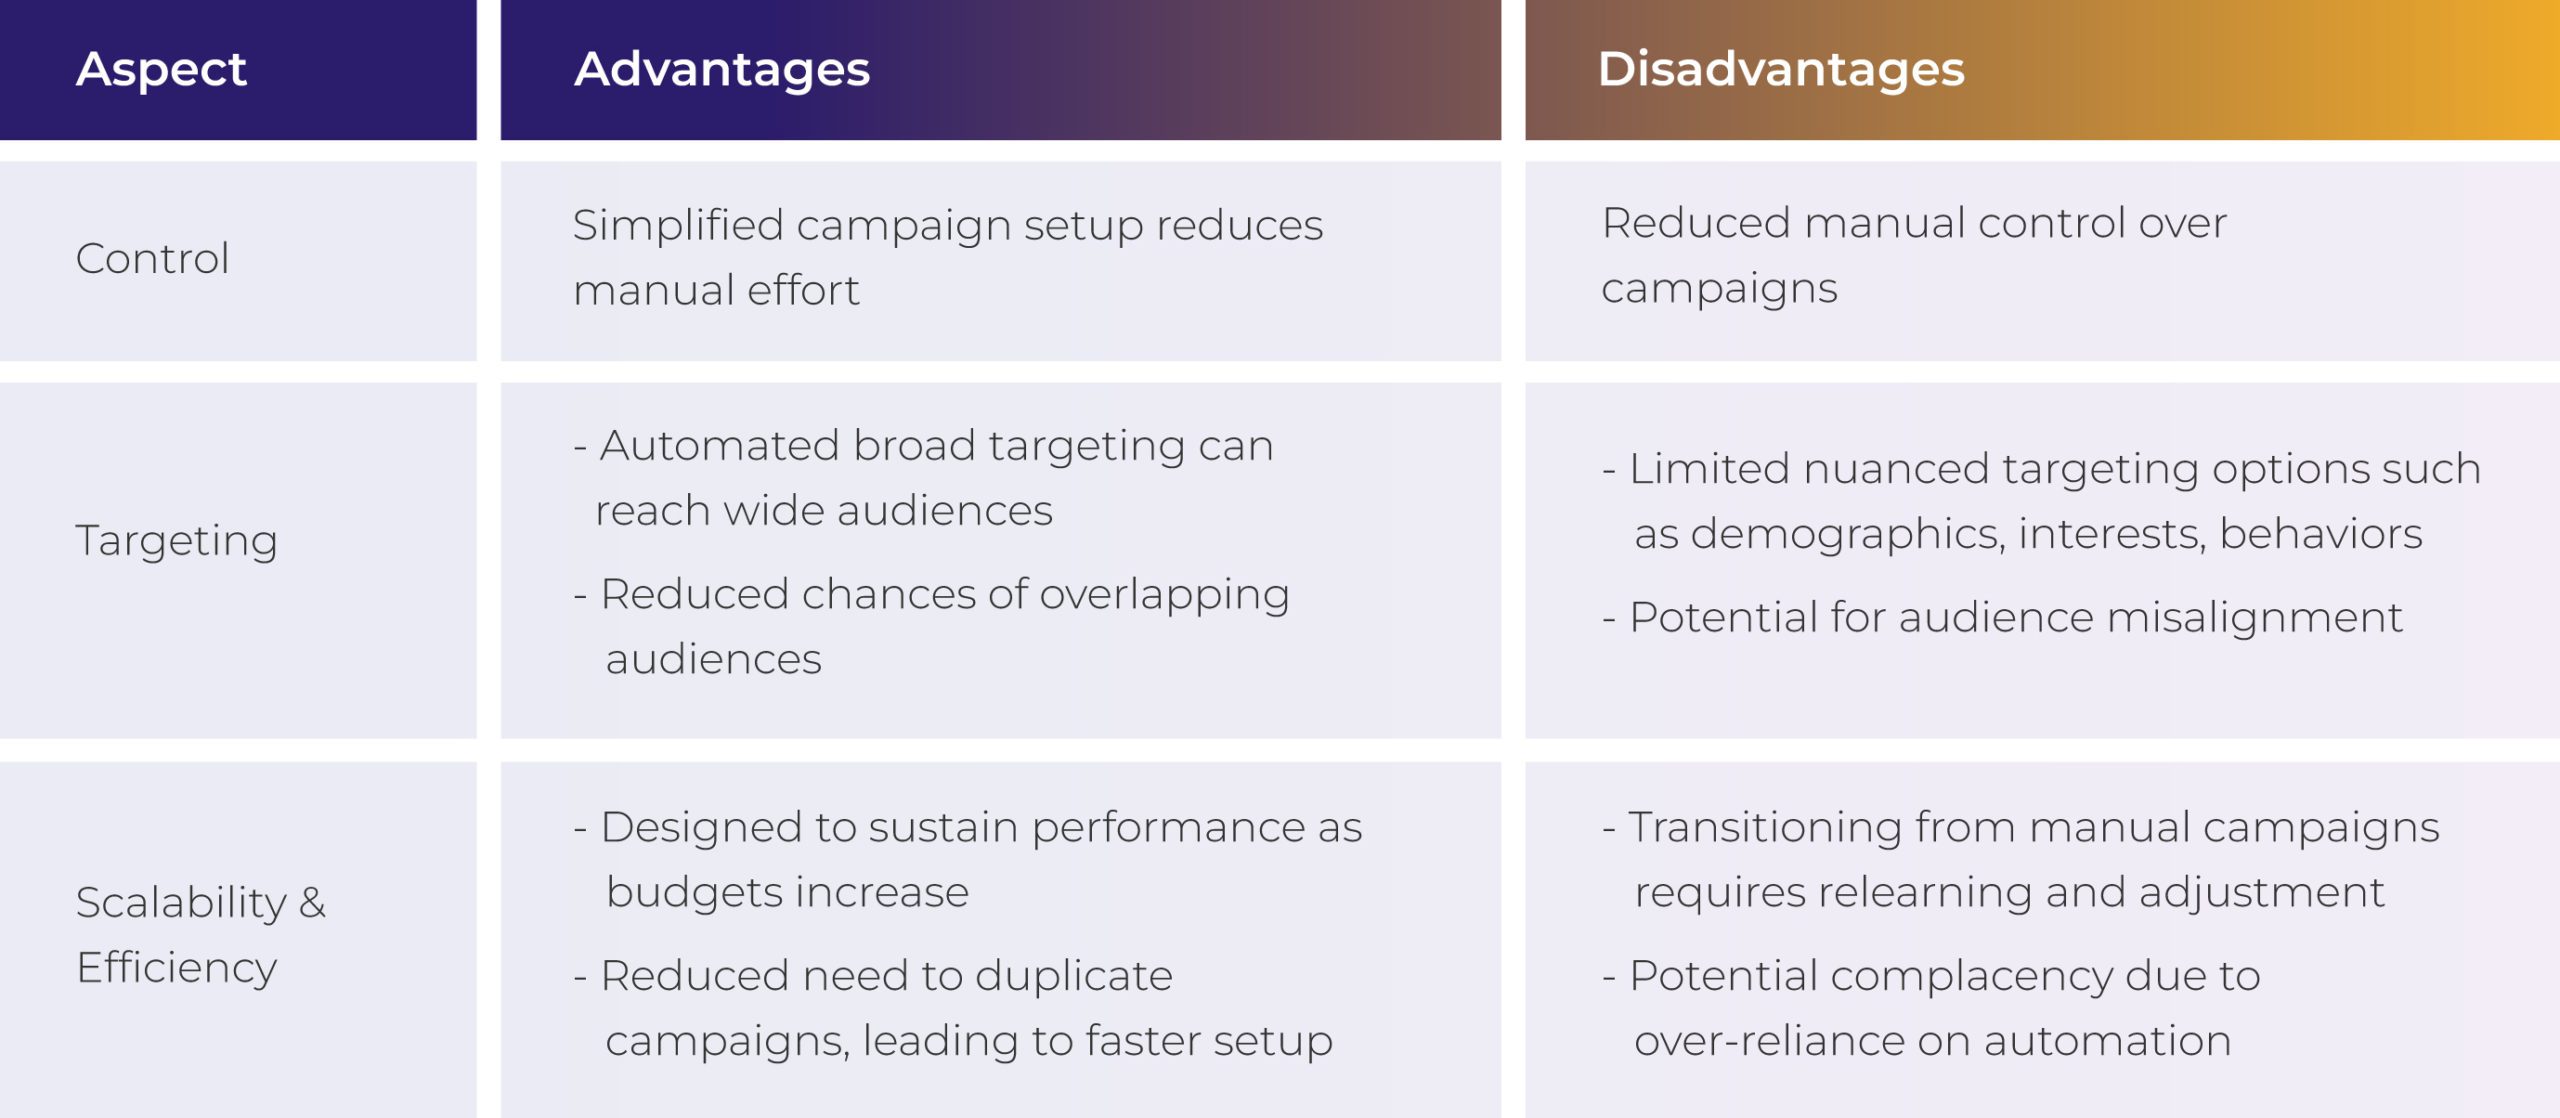 Table: The advantages and disadvantages of Advantage+ App Campaigns on Meta Aspect Advantages Disadvantages Control - Simplified campaign setup reduces manual effort - Reduced manual control over campaigns Targeting - Automated broad targeting can reach wide audiences - Reduced chances of overlapping audiences - Limited nuanced targeting options such as demographics, interests, behaviors - Potential for audience misalignment Scalability & Efficiency - Designed to sustain performance as budgets increase - Reduced need to duplicate campaigns, leading to faster setup - Transitioning from manual campaigns requires relearning and adjustment - Potential complacency due to over-reliance on automation